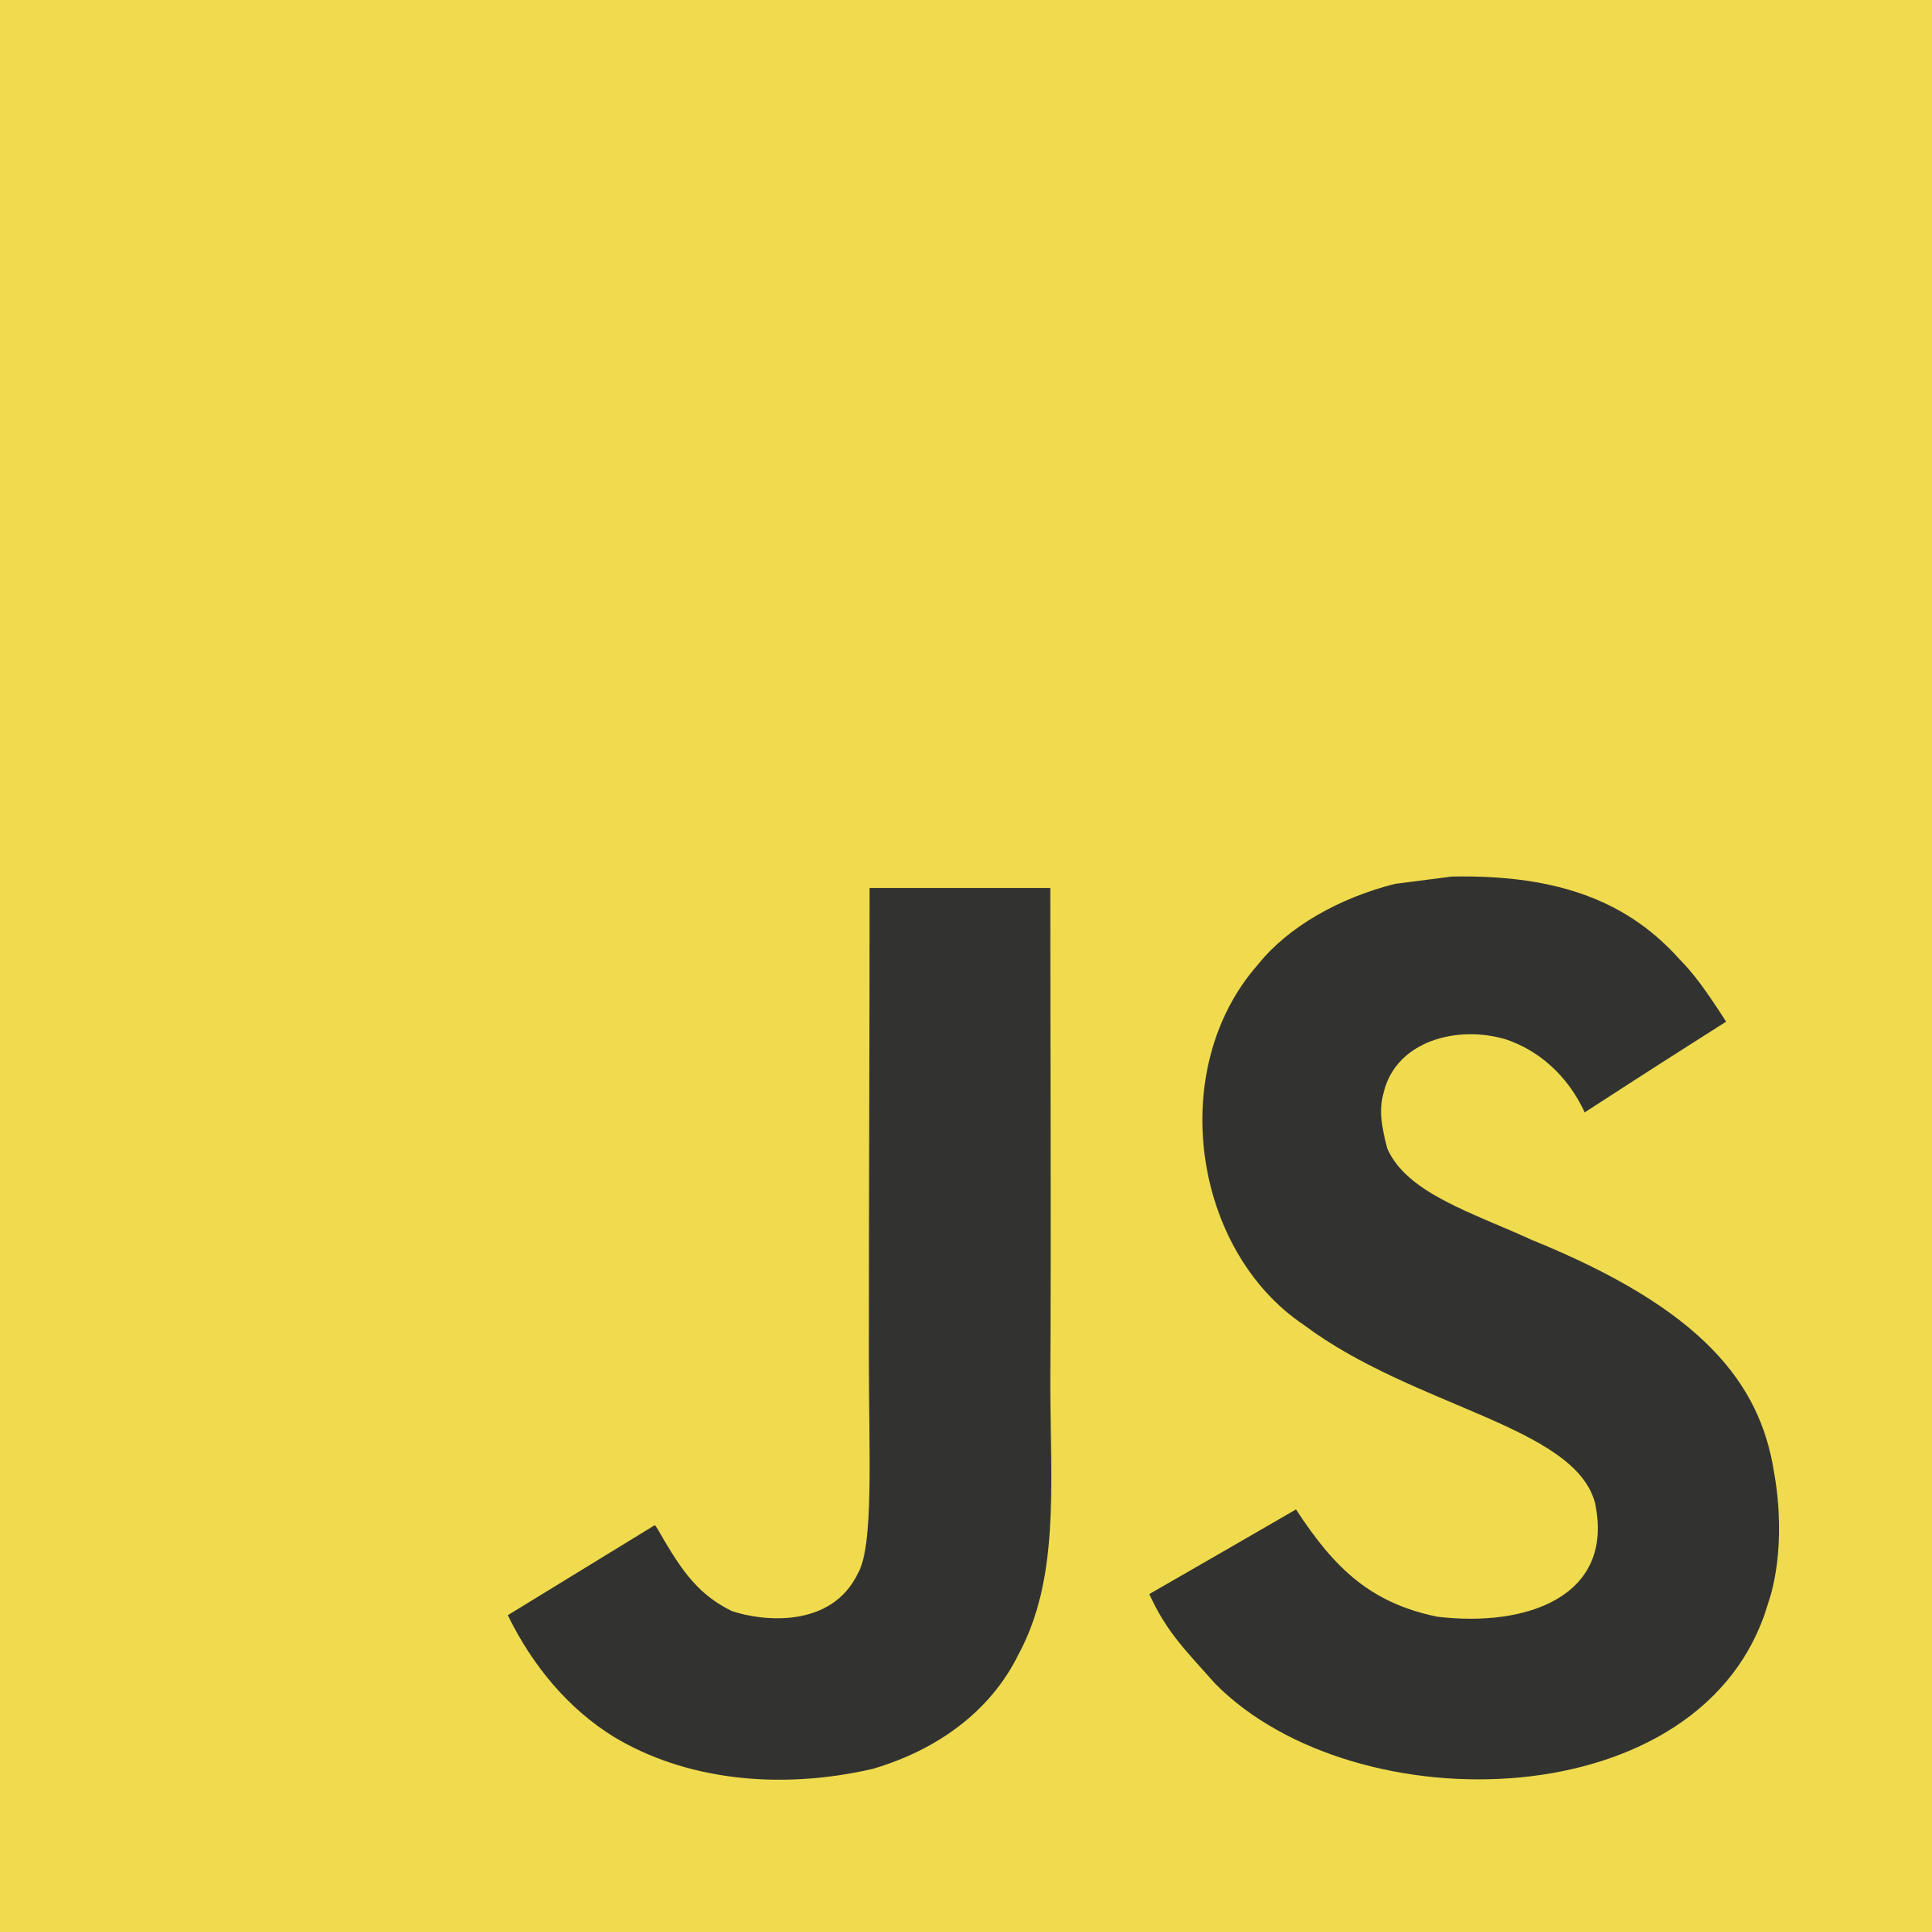 An image of the Javascript icon